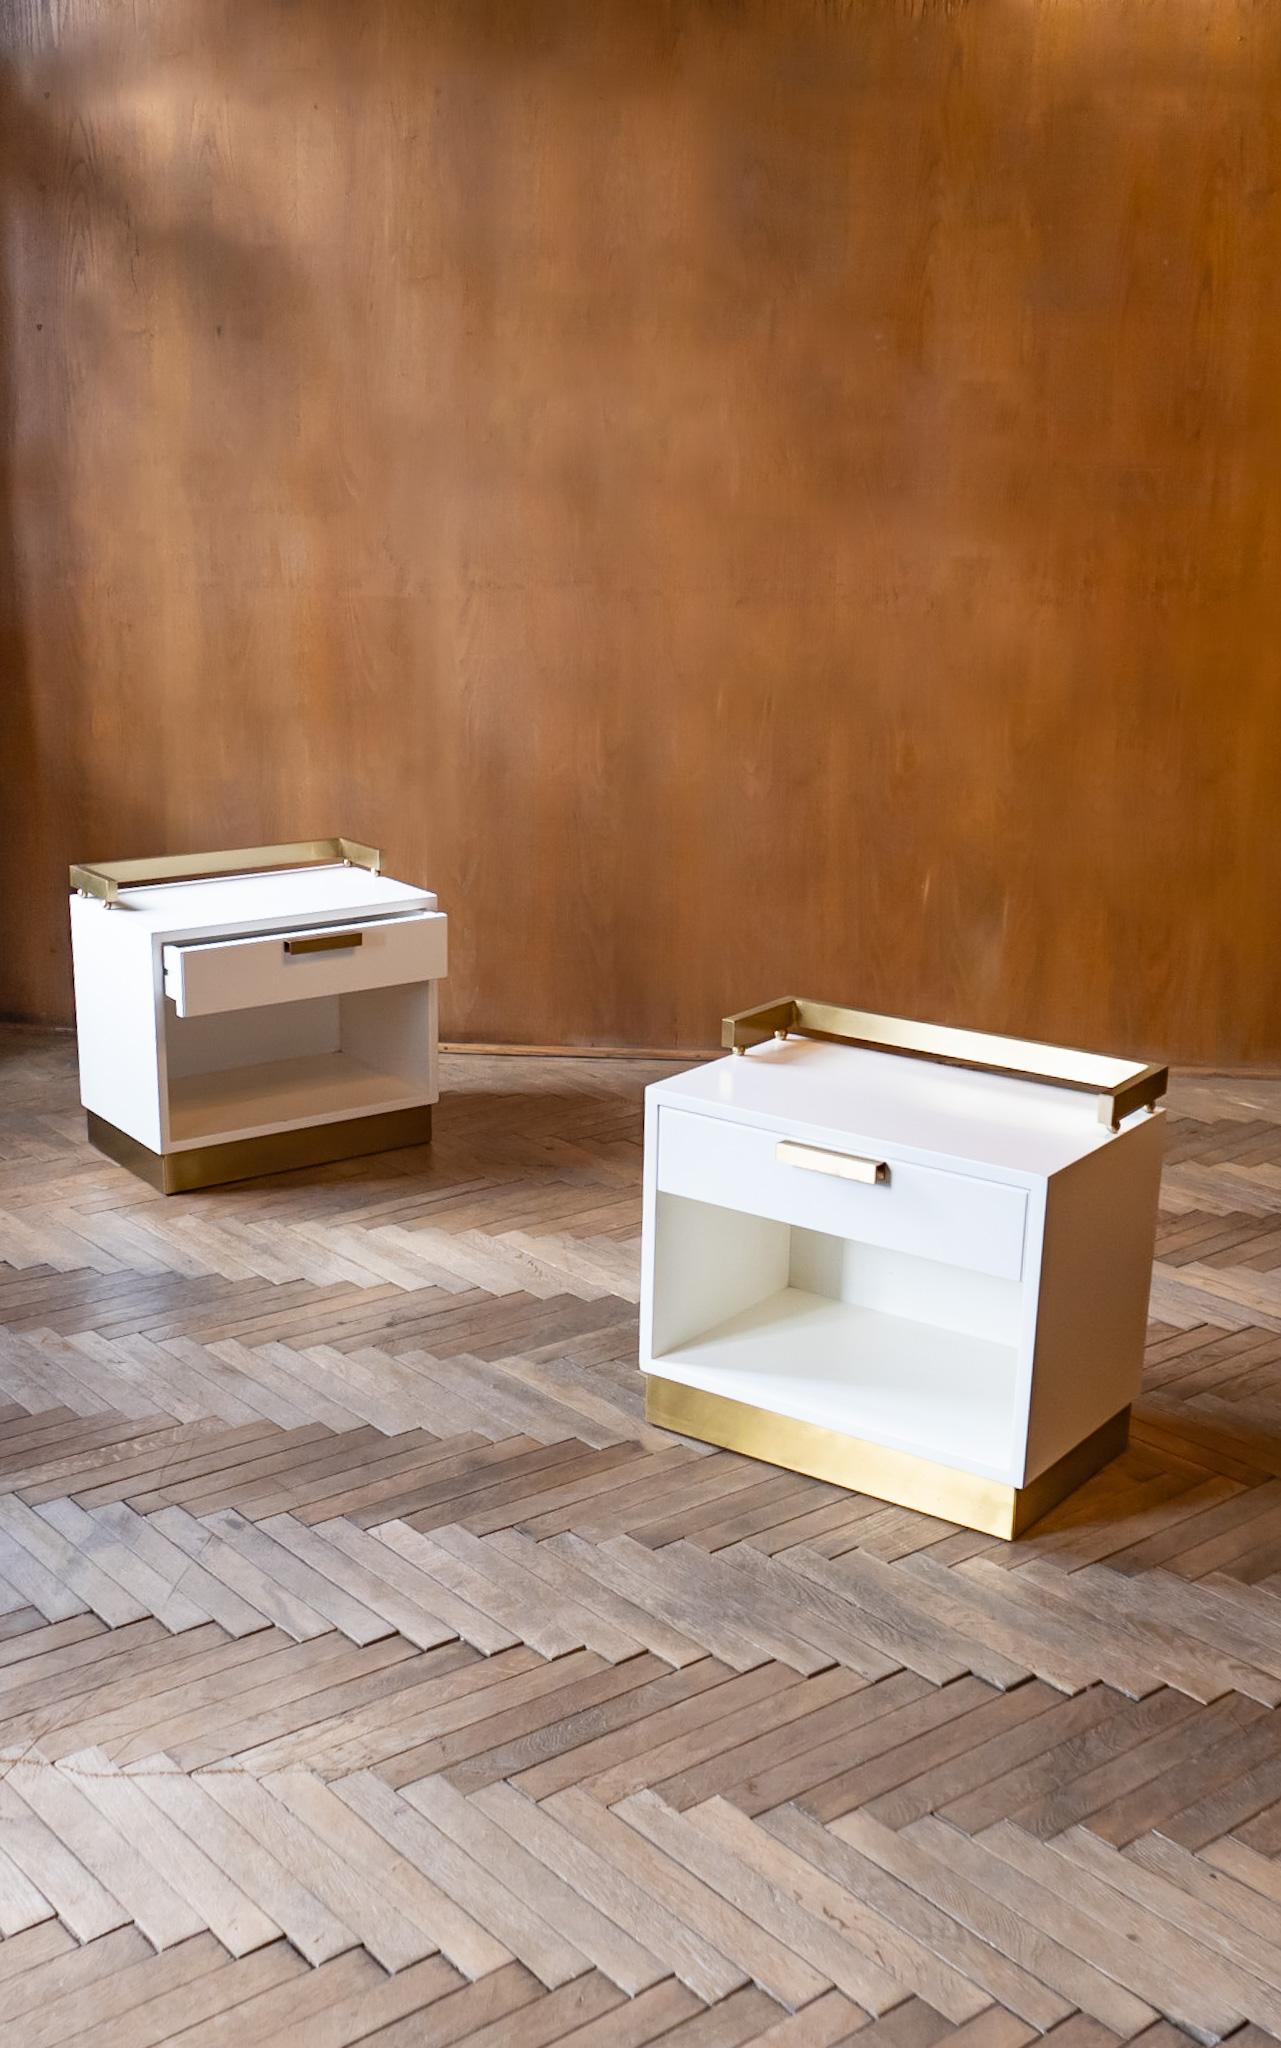 Pair of white golden night stands by Luciano Frigerio, Italy 1970s.

This elegant pair of white lacquered wooden nights stands with elements of golden brass by the famous Italian Designer Luciano Frigerio give every bedroom this certain eclectic